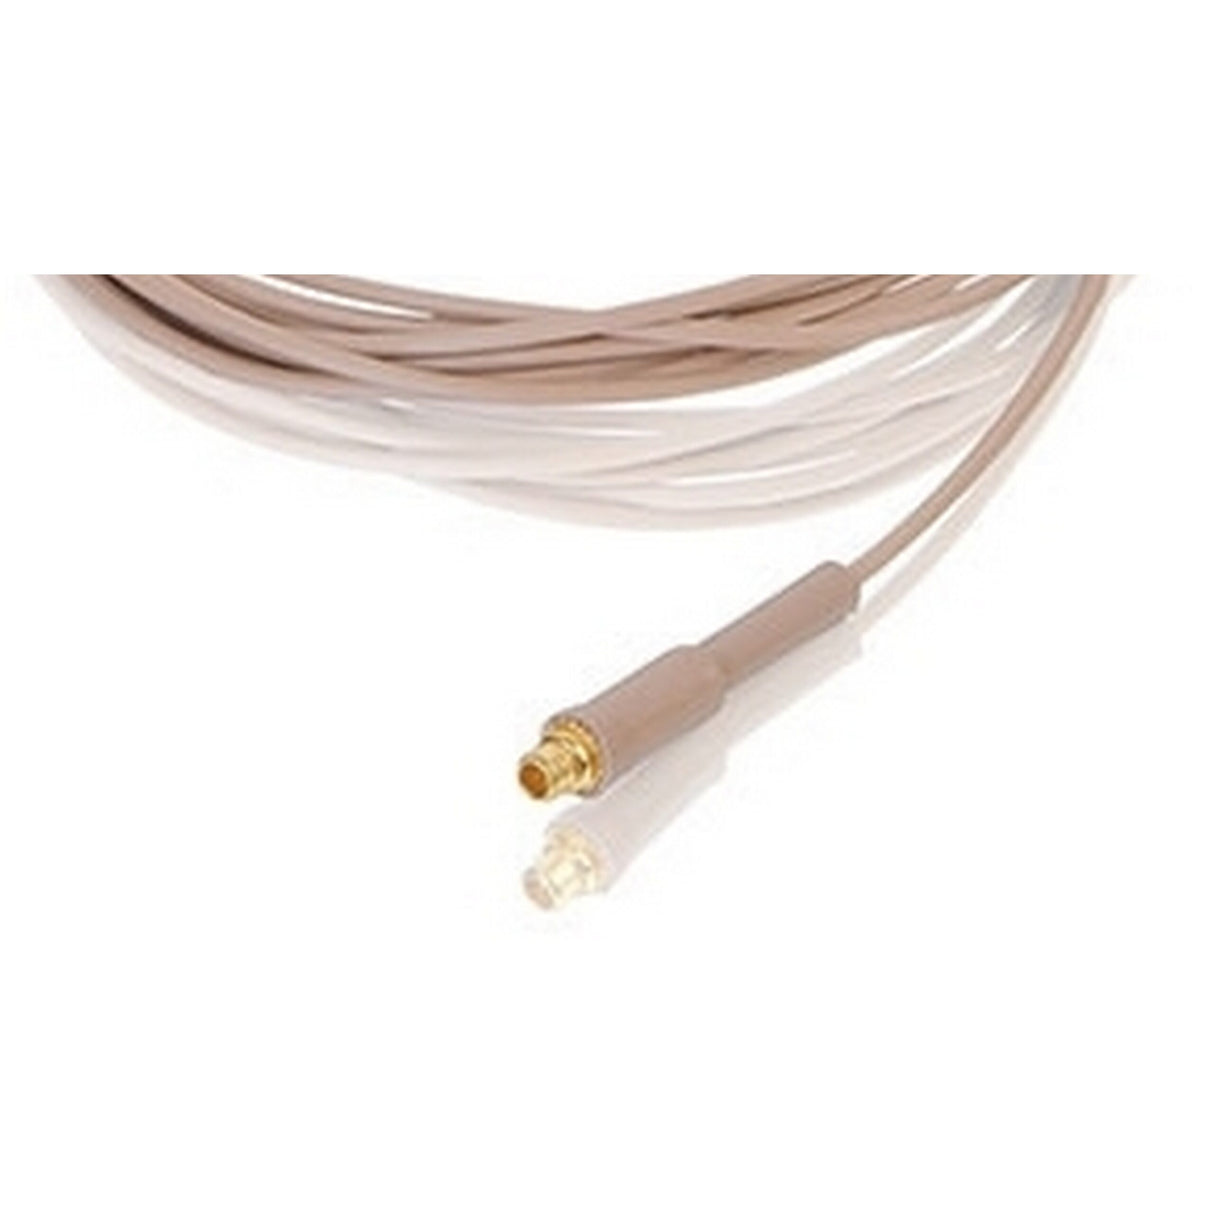 Countryman IsoMax E6 Replacement Cable - Light Beige, 2mm, Sennheiser Transmitter